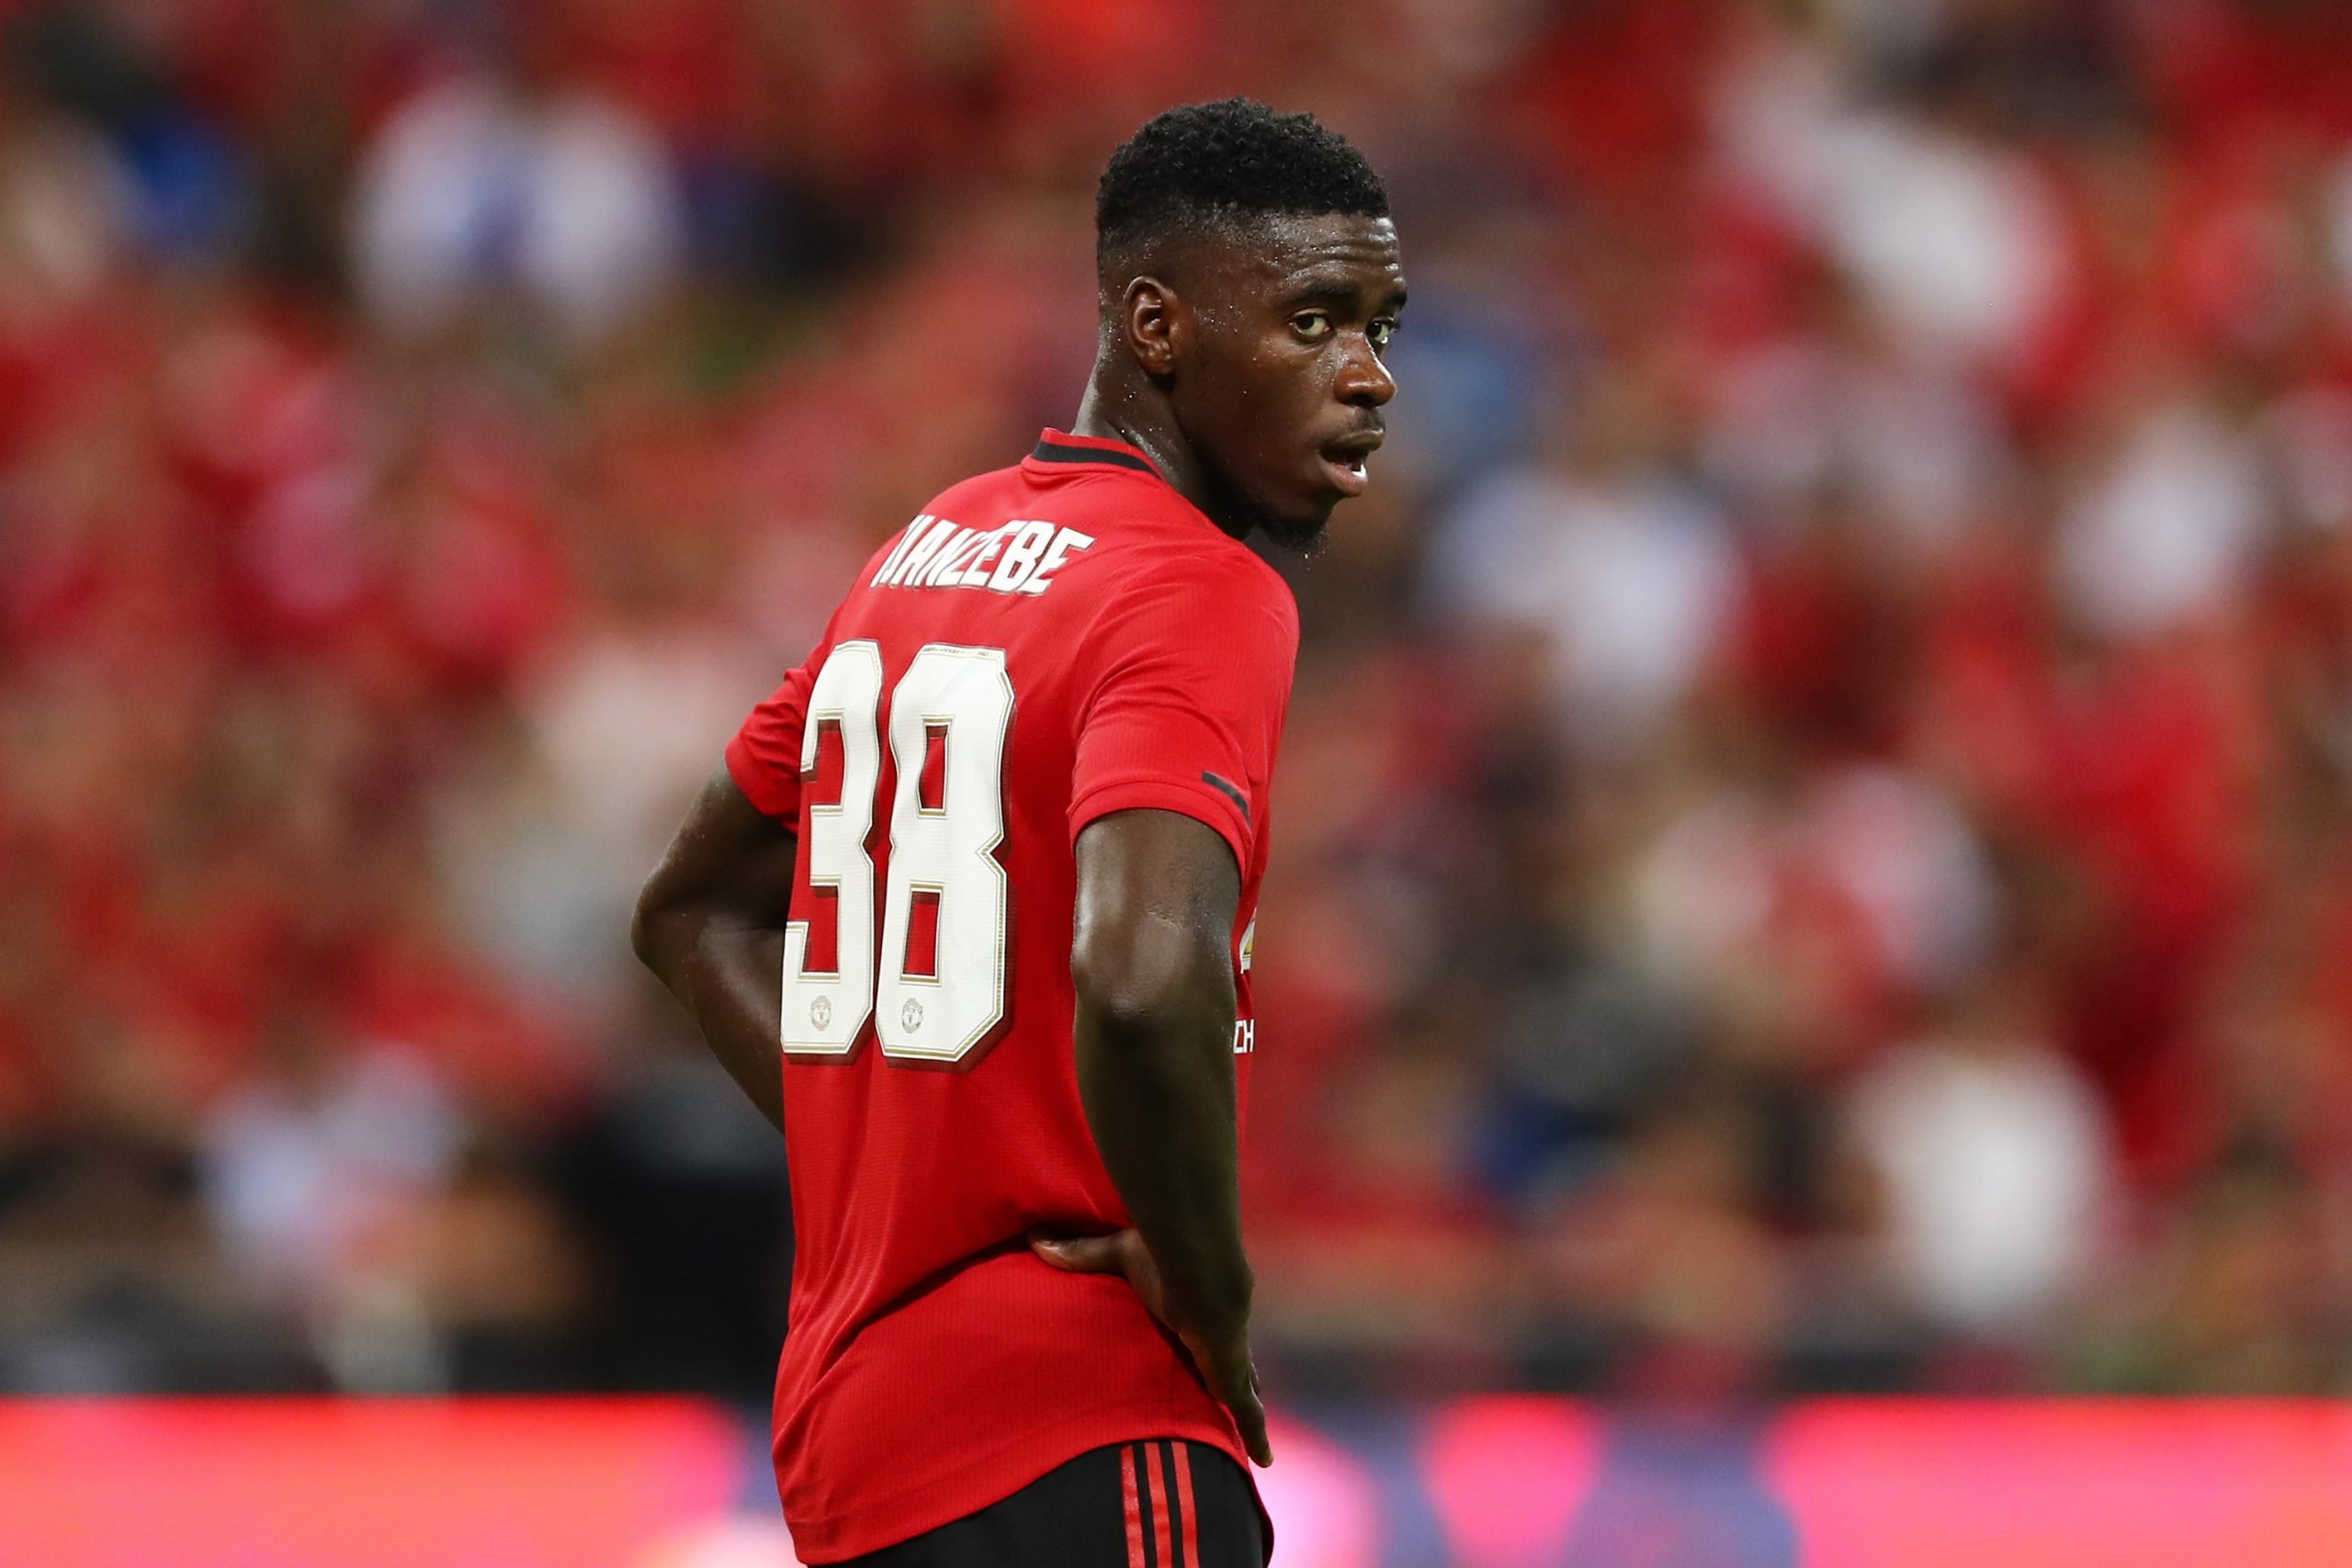 Strongest Possible Manchester United Lineup This Season - Tuanzebe starts ahead of Lindelof.